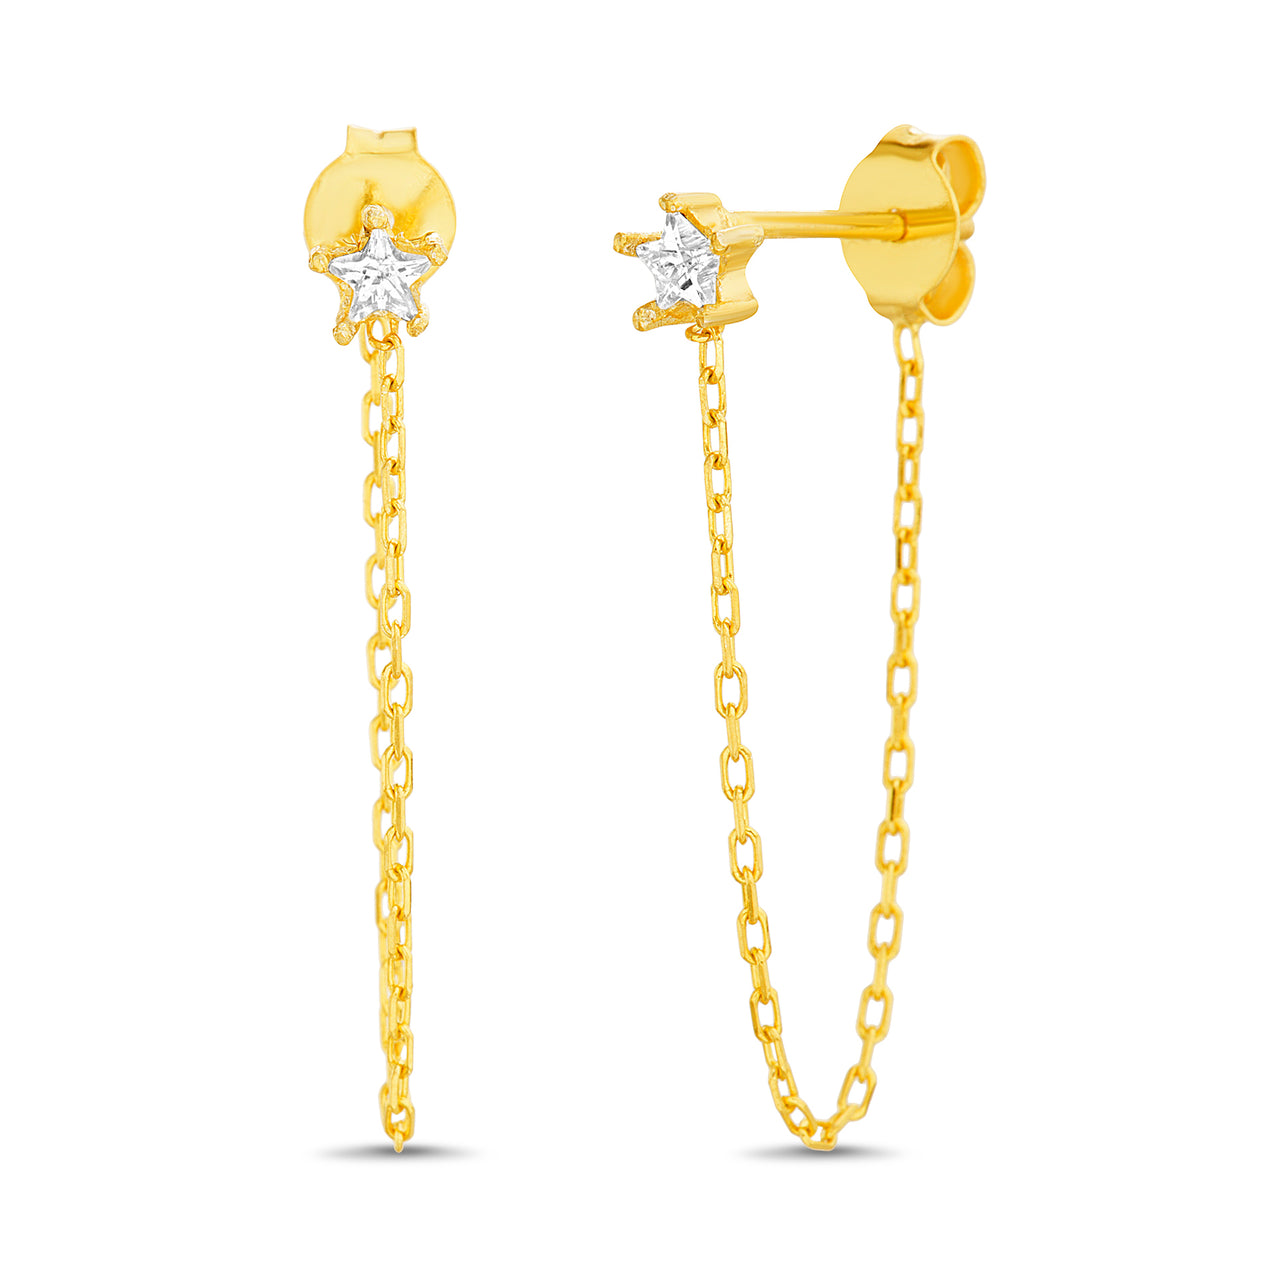 Lesa Michele Star Cubic Zirconia Post Chain Front to Back Earrings in Yellow Gold Plated Sterling Silver